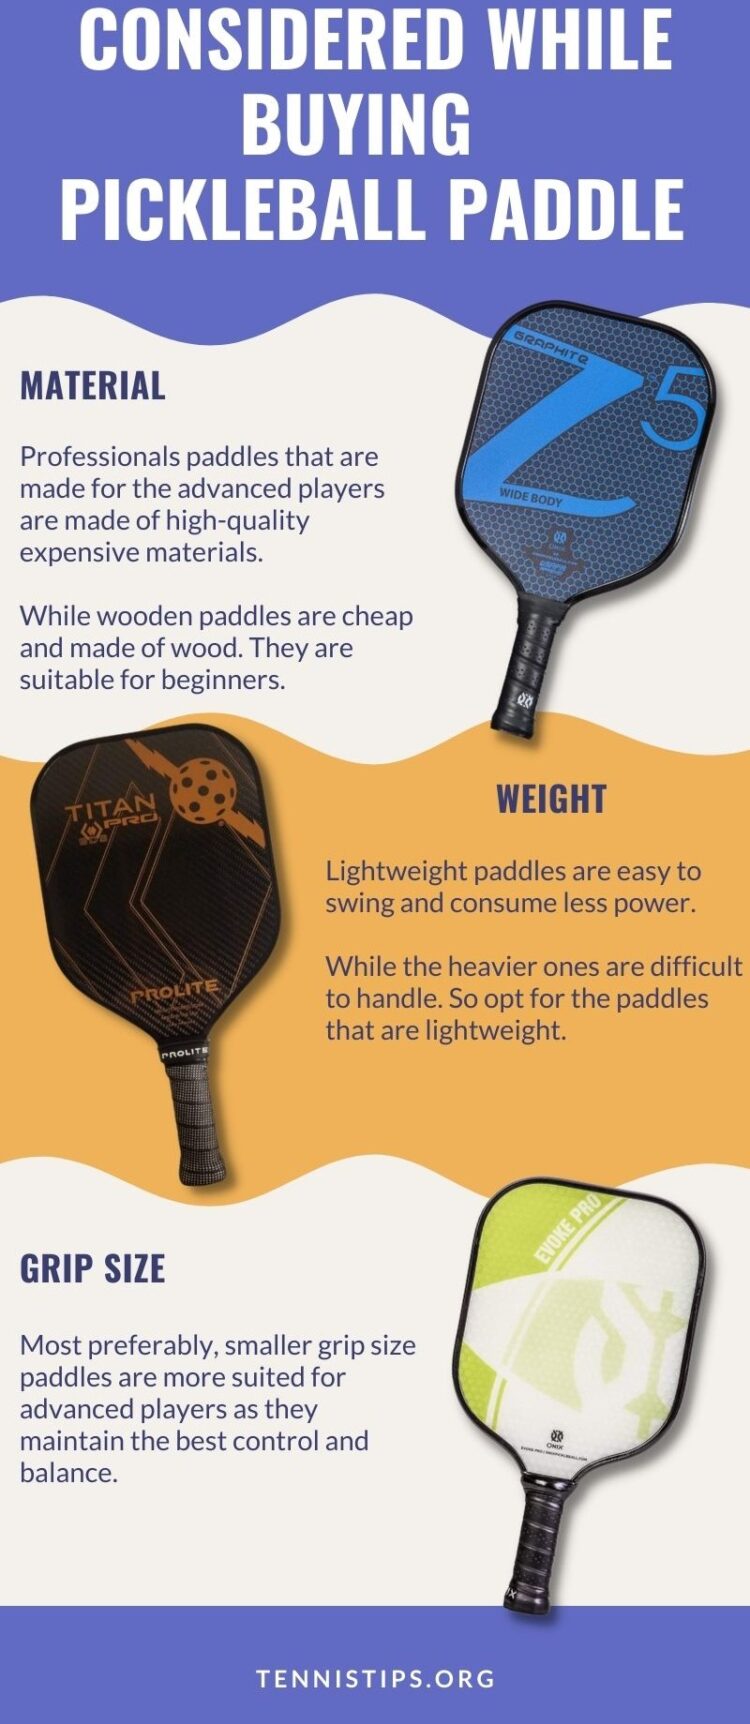 Buying Pickleball Paddle infographic